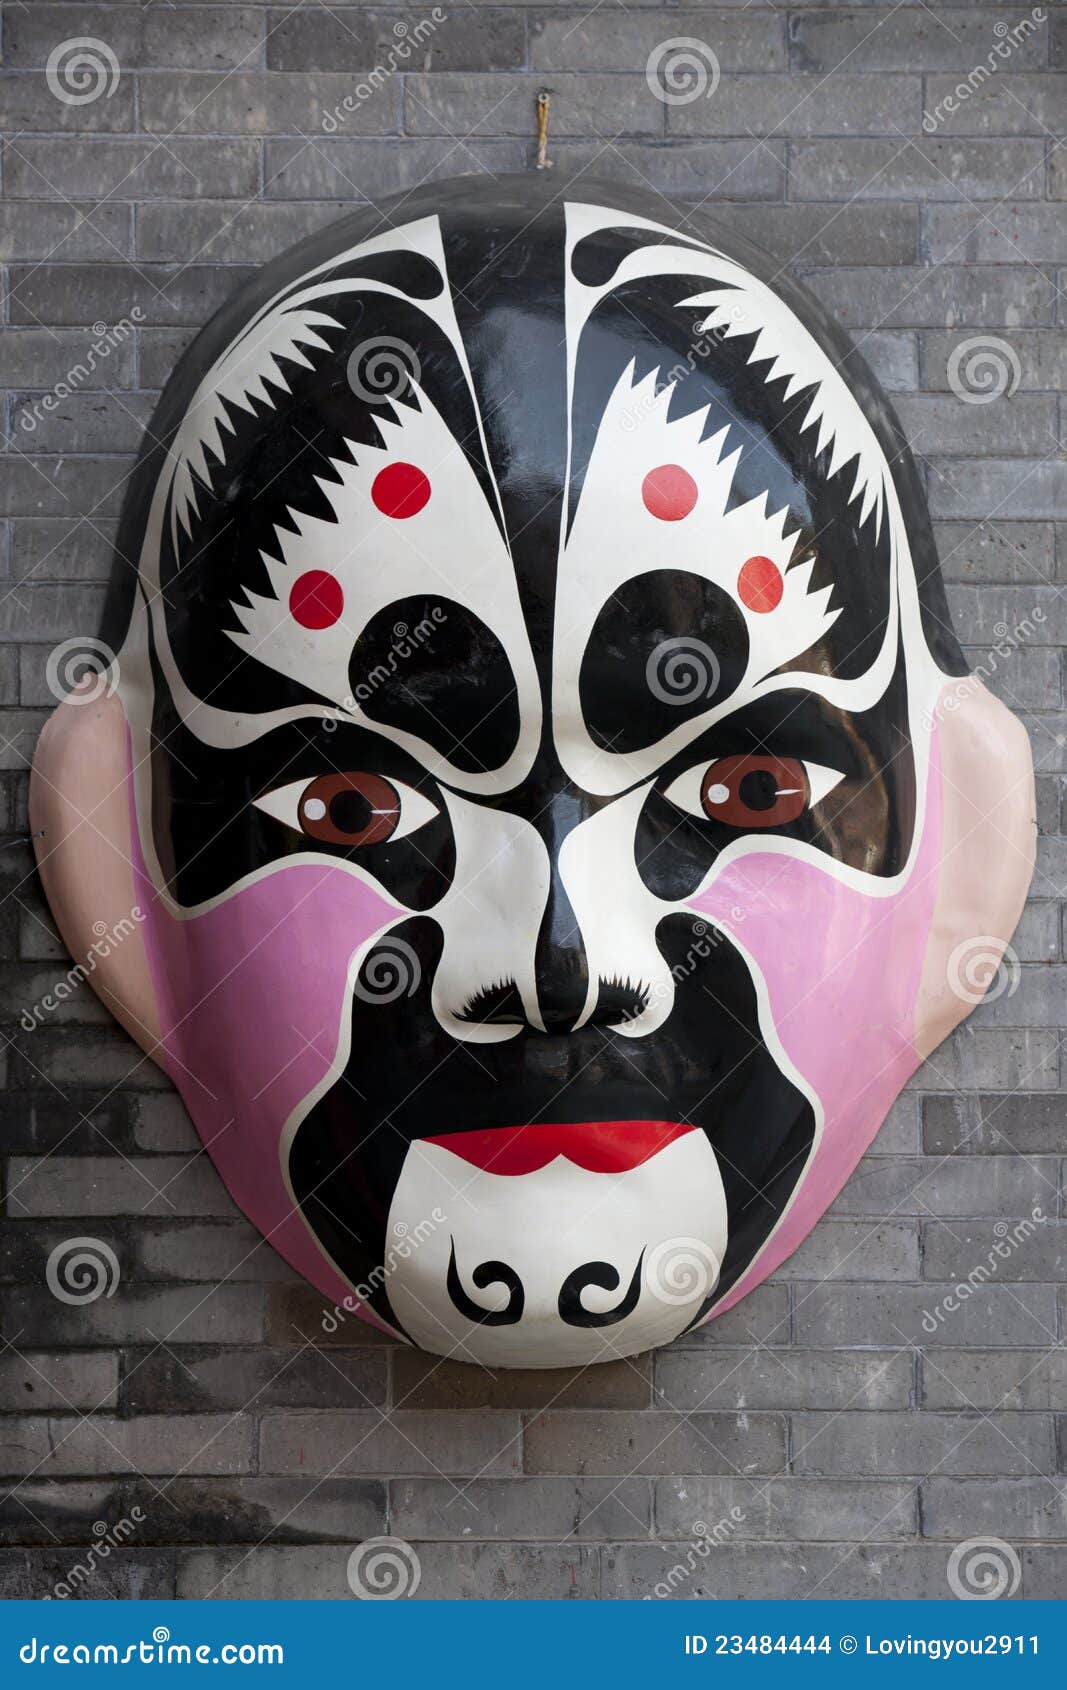 Mask stock photo. Image of cultural 23484444